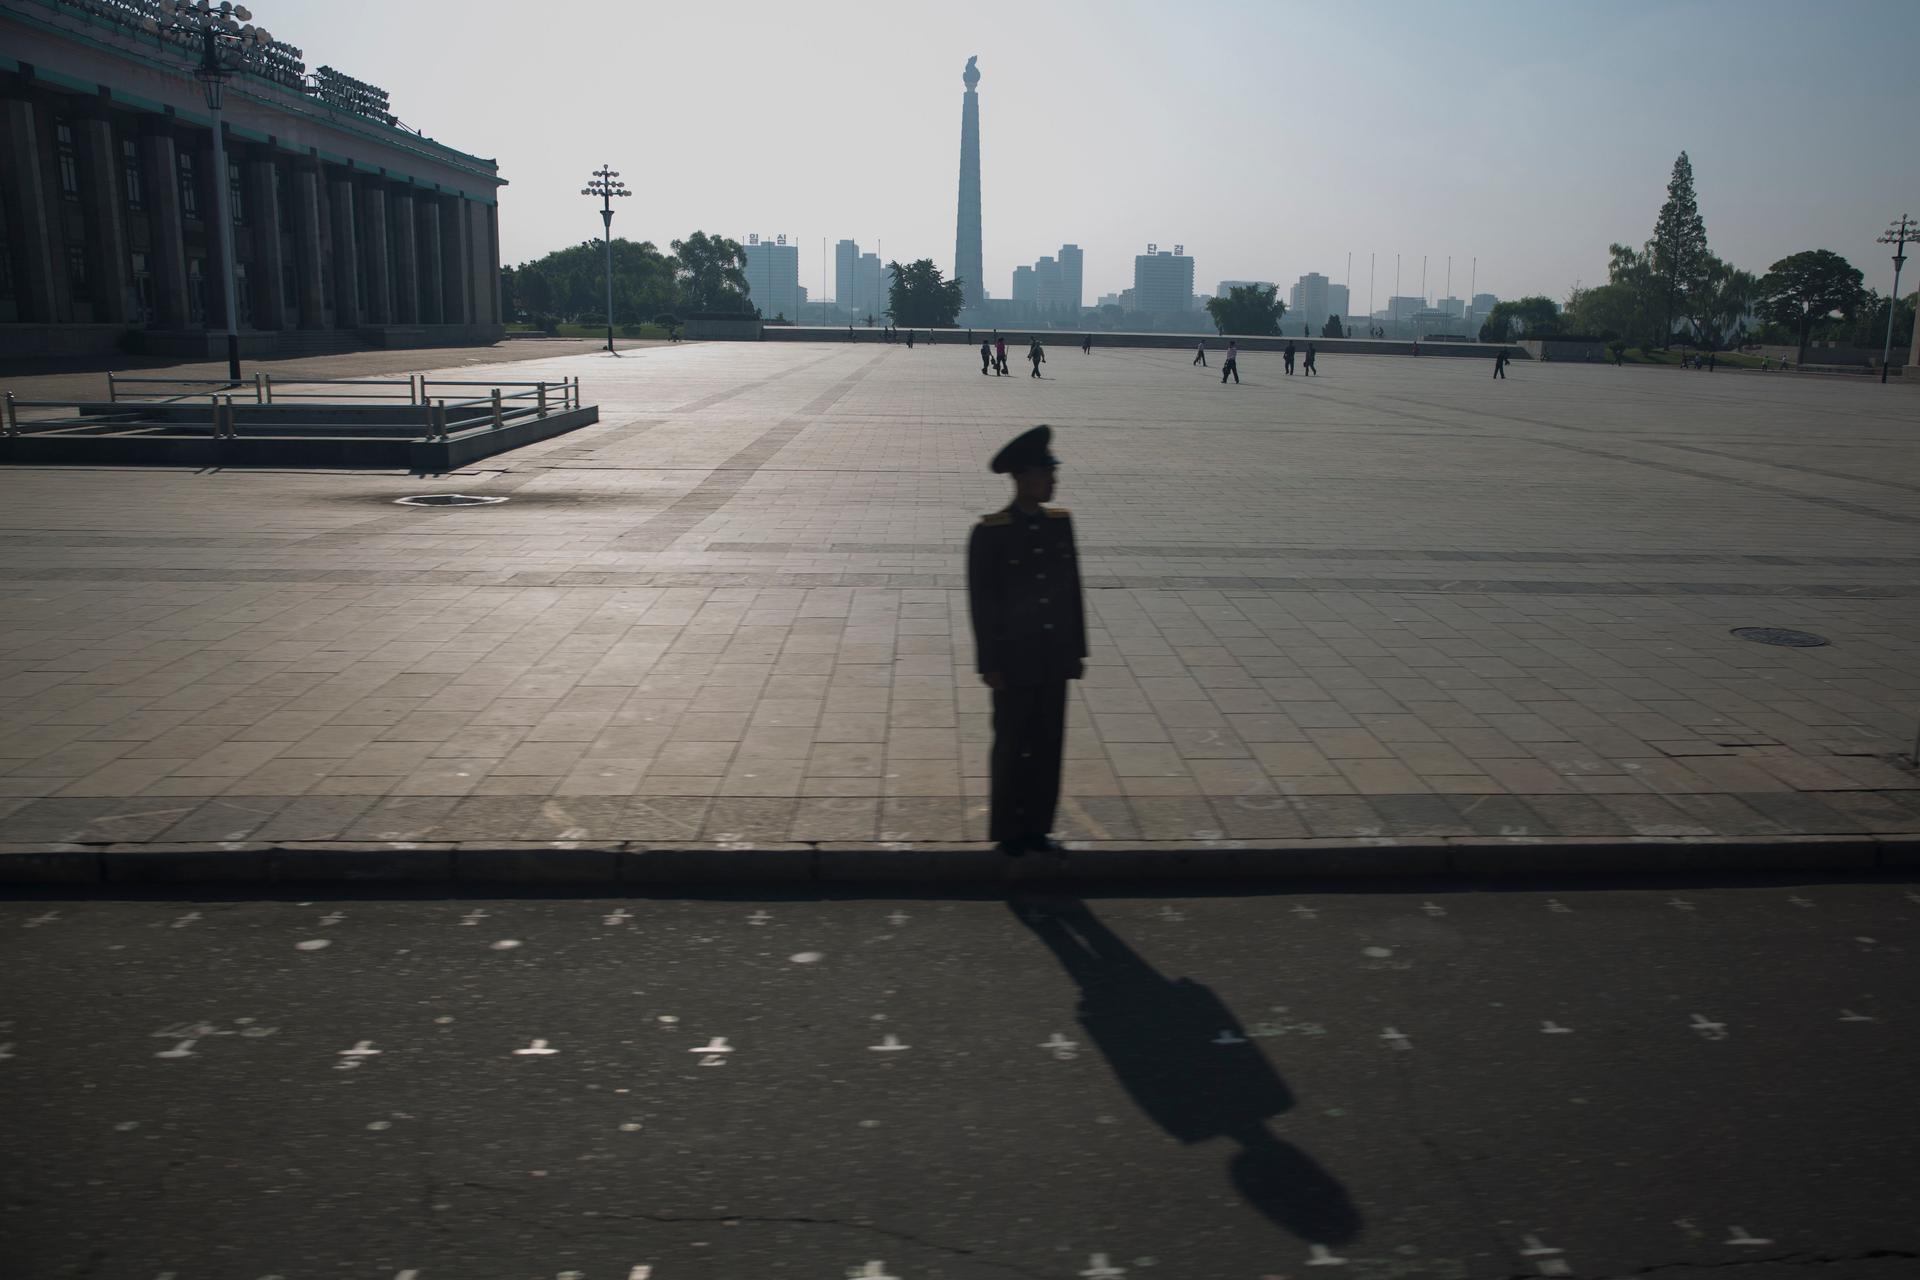 A North Korean soldier on Kim Il-sung Square in Pyongyang. The permanent markings on the street and square indicate marching steps for parades.